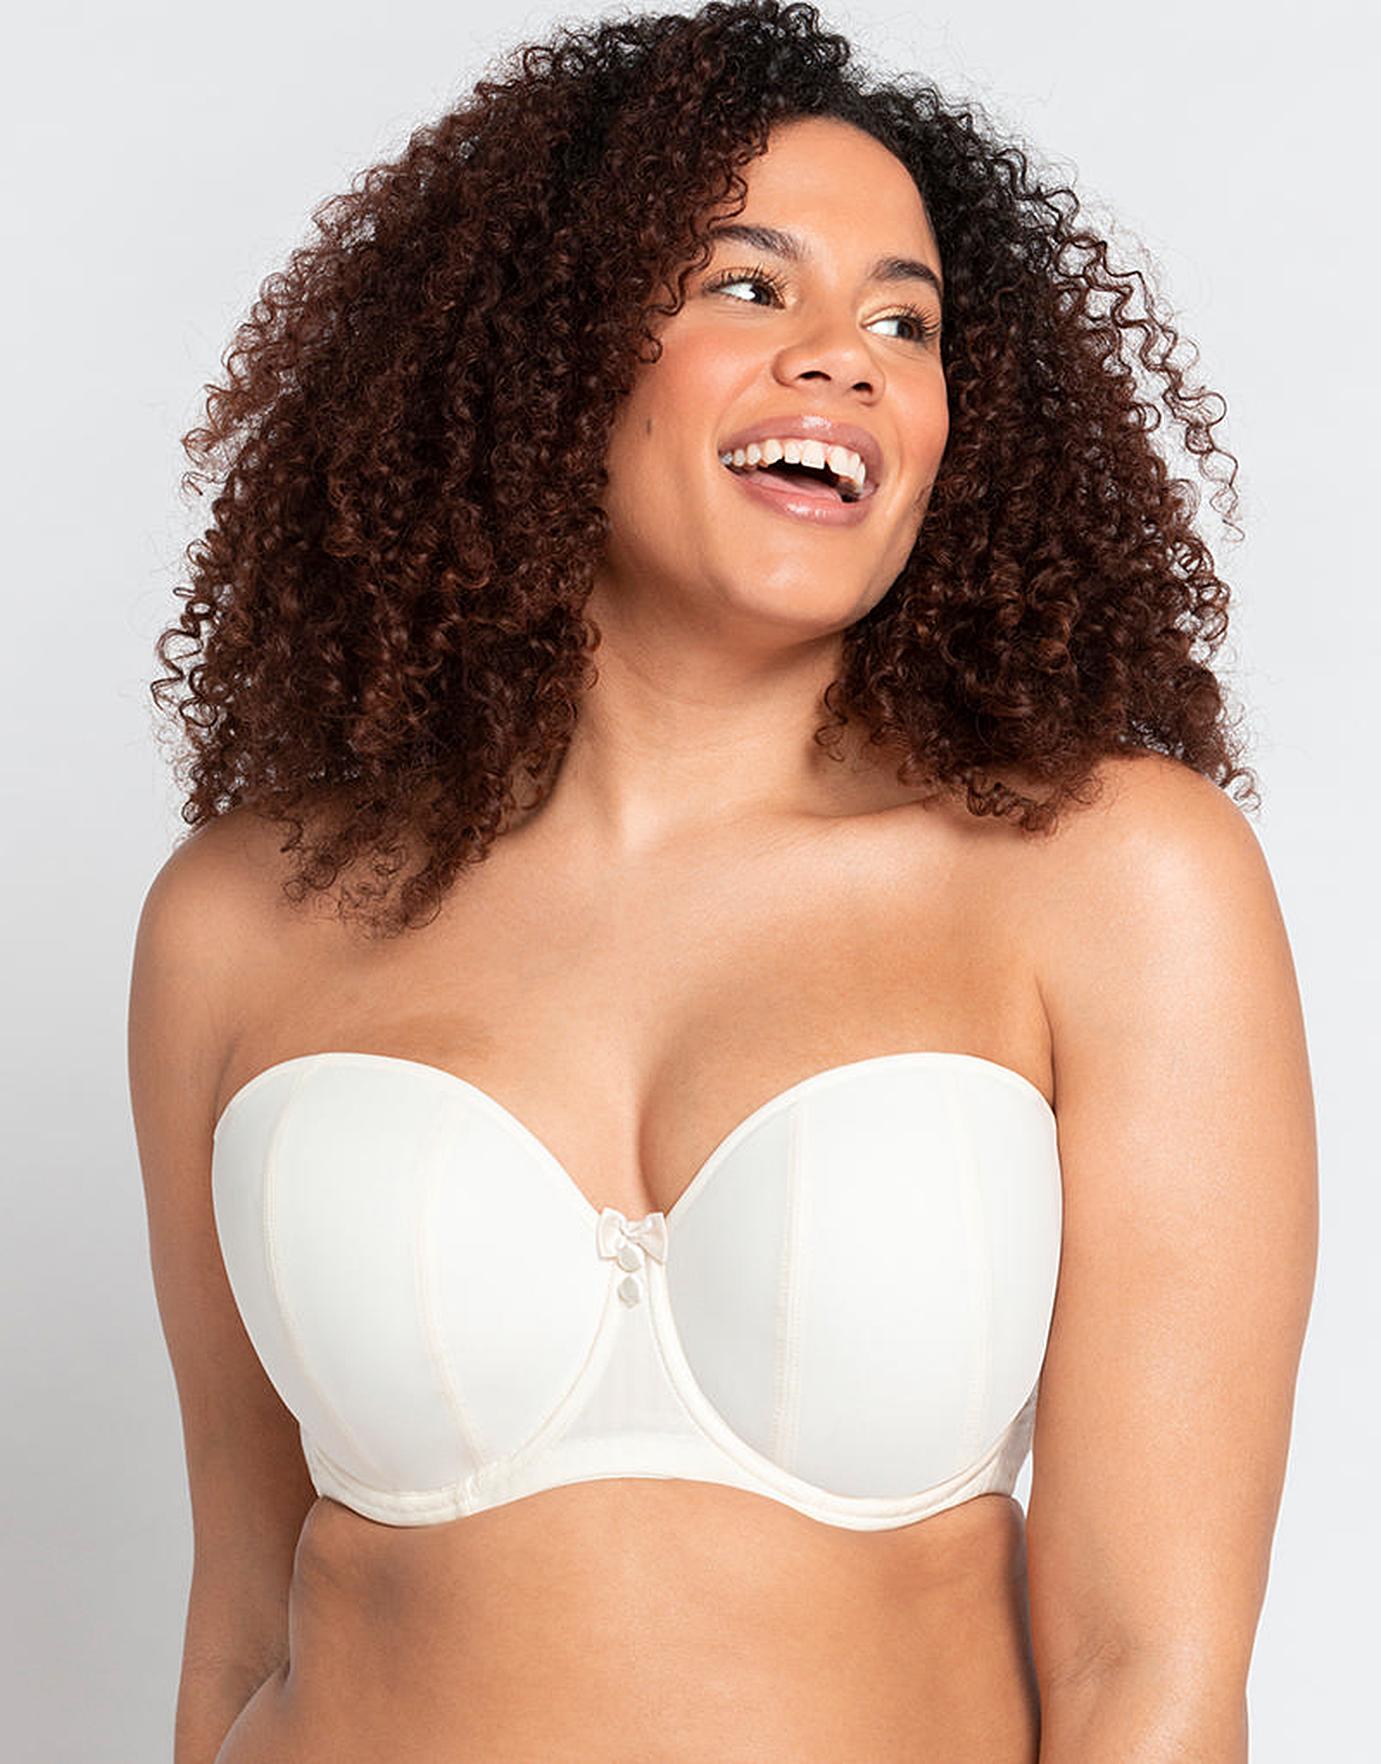 Why Does My Bra Cause Spillage? – Curvy Kate UK